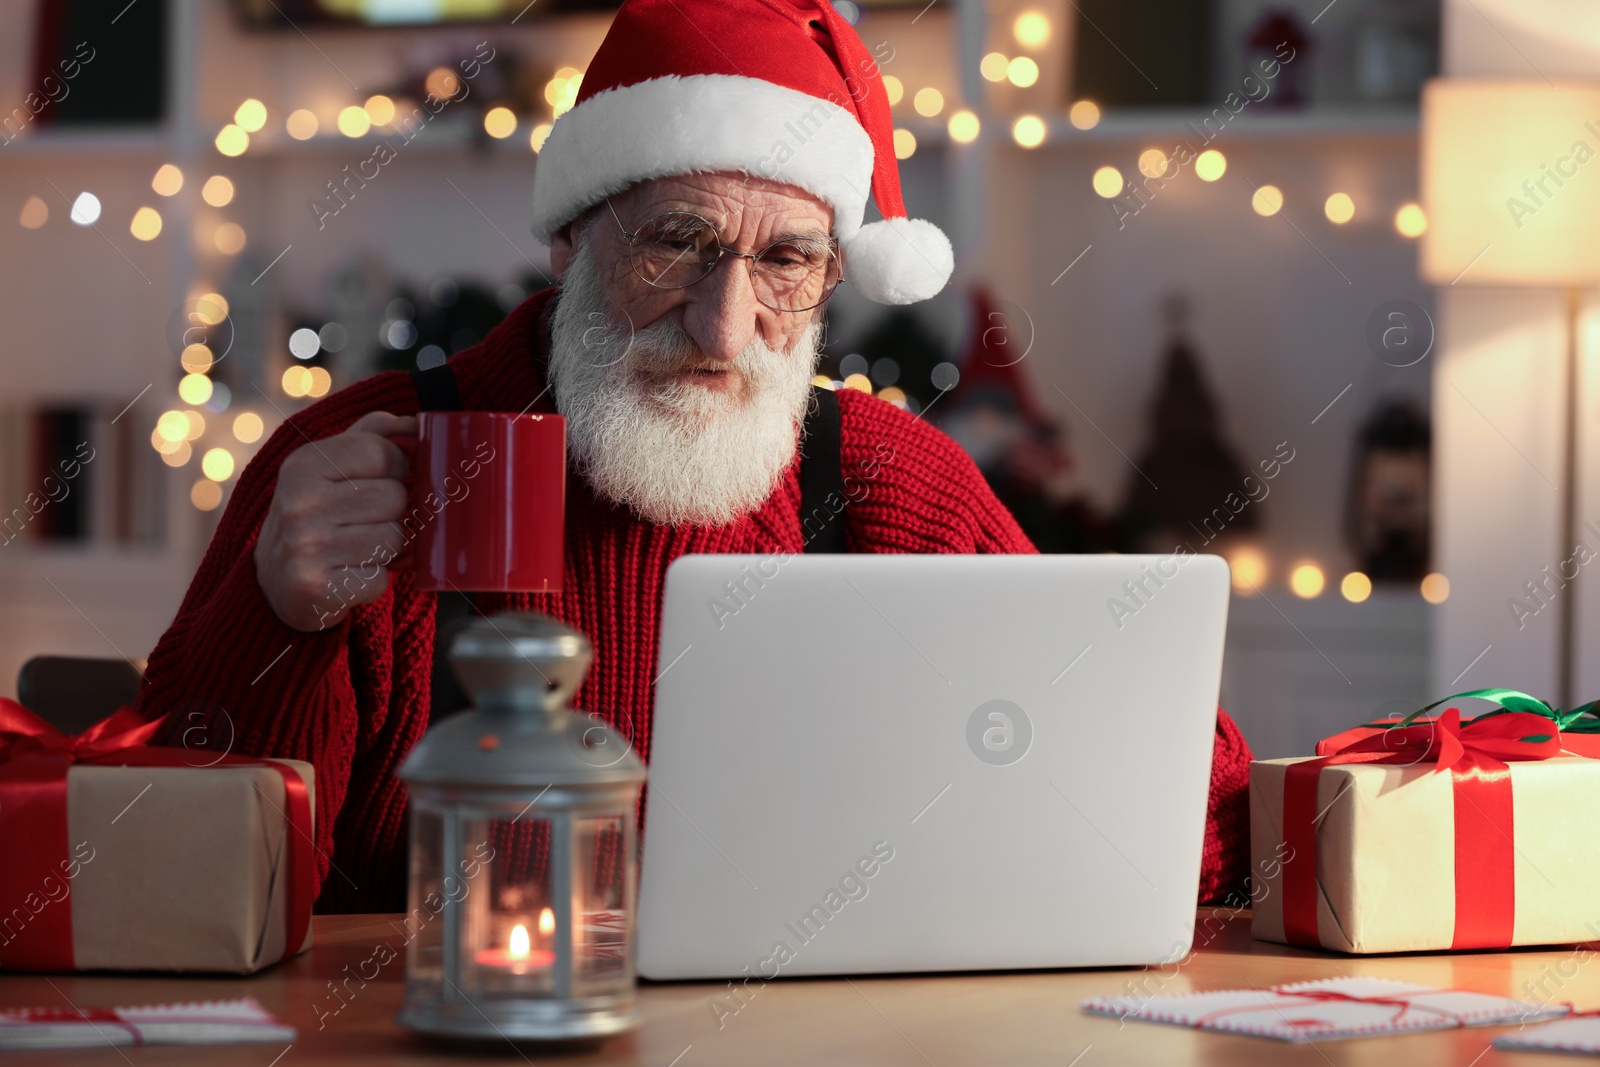 Photo of Santa Claus using laptop and drinking hot beverage at his workplace in room decorated for Christmas